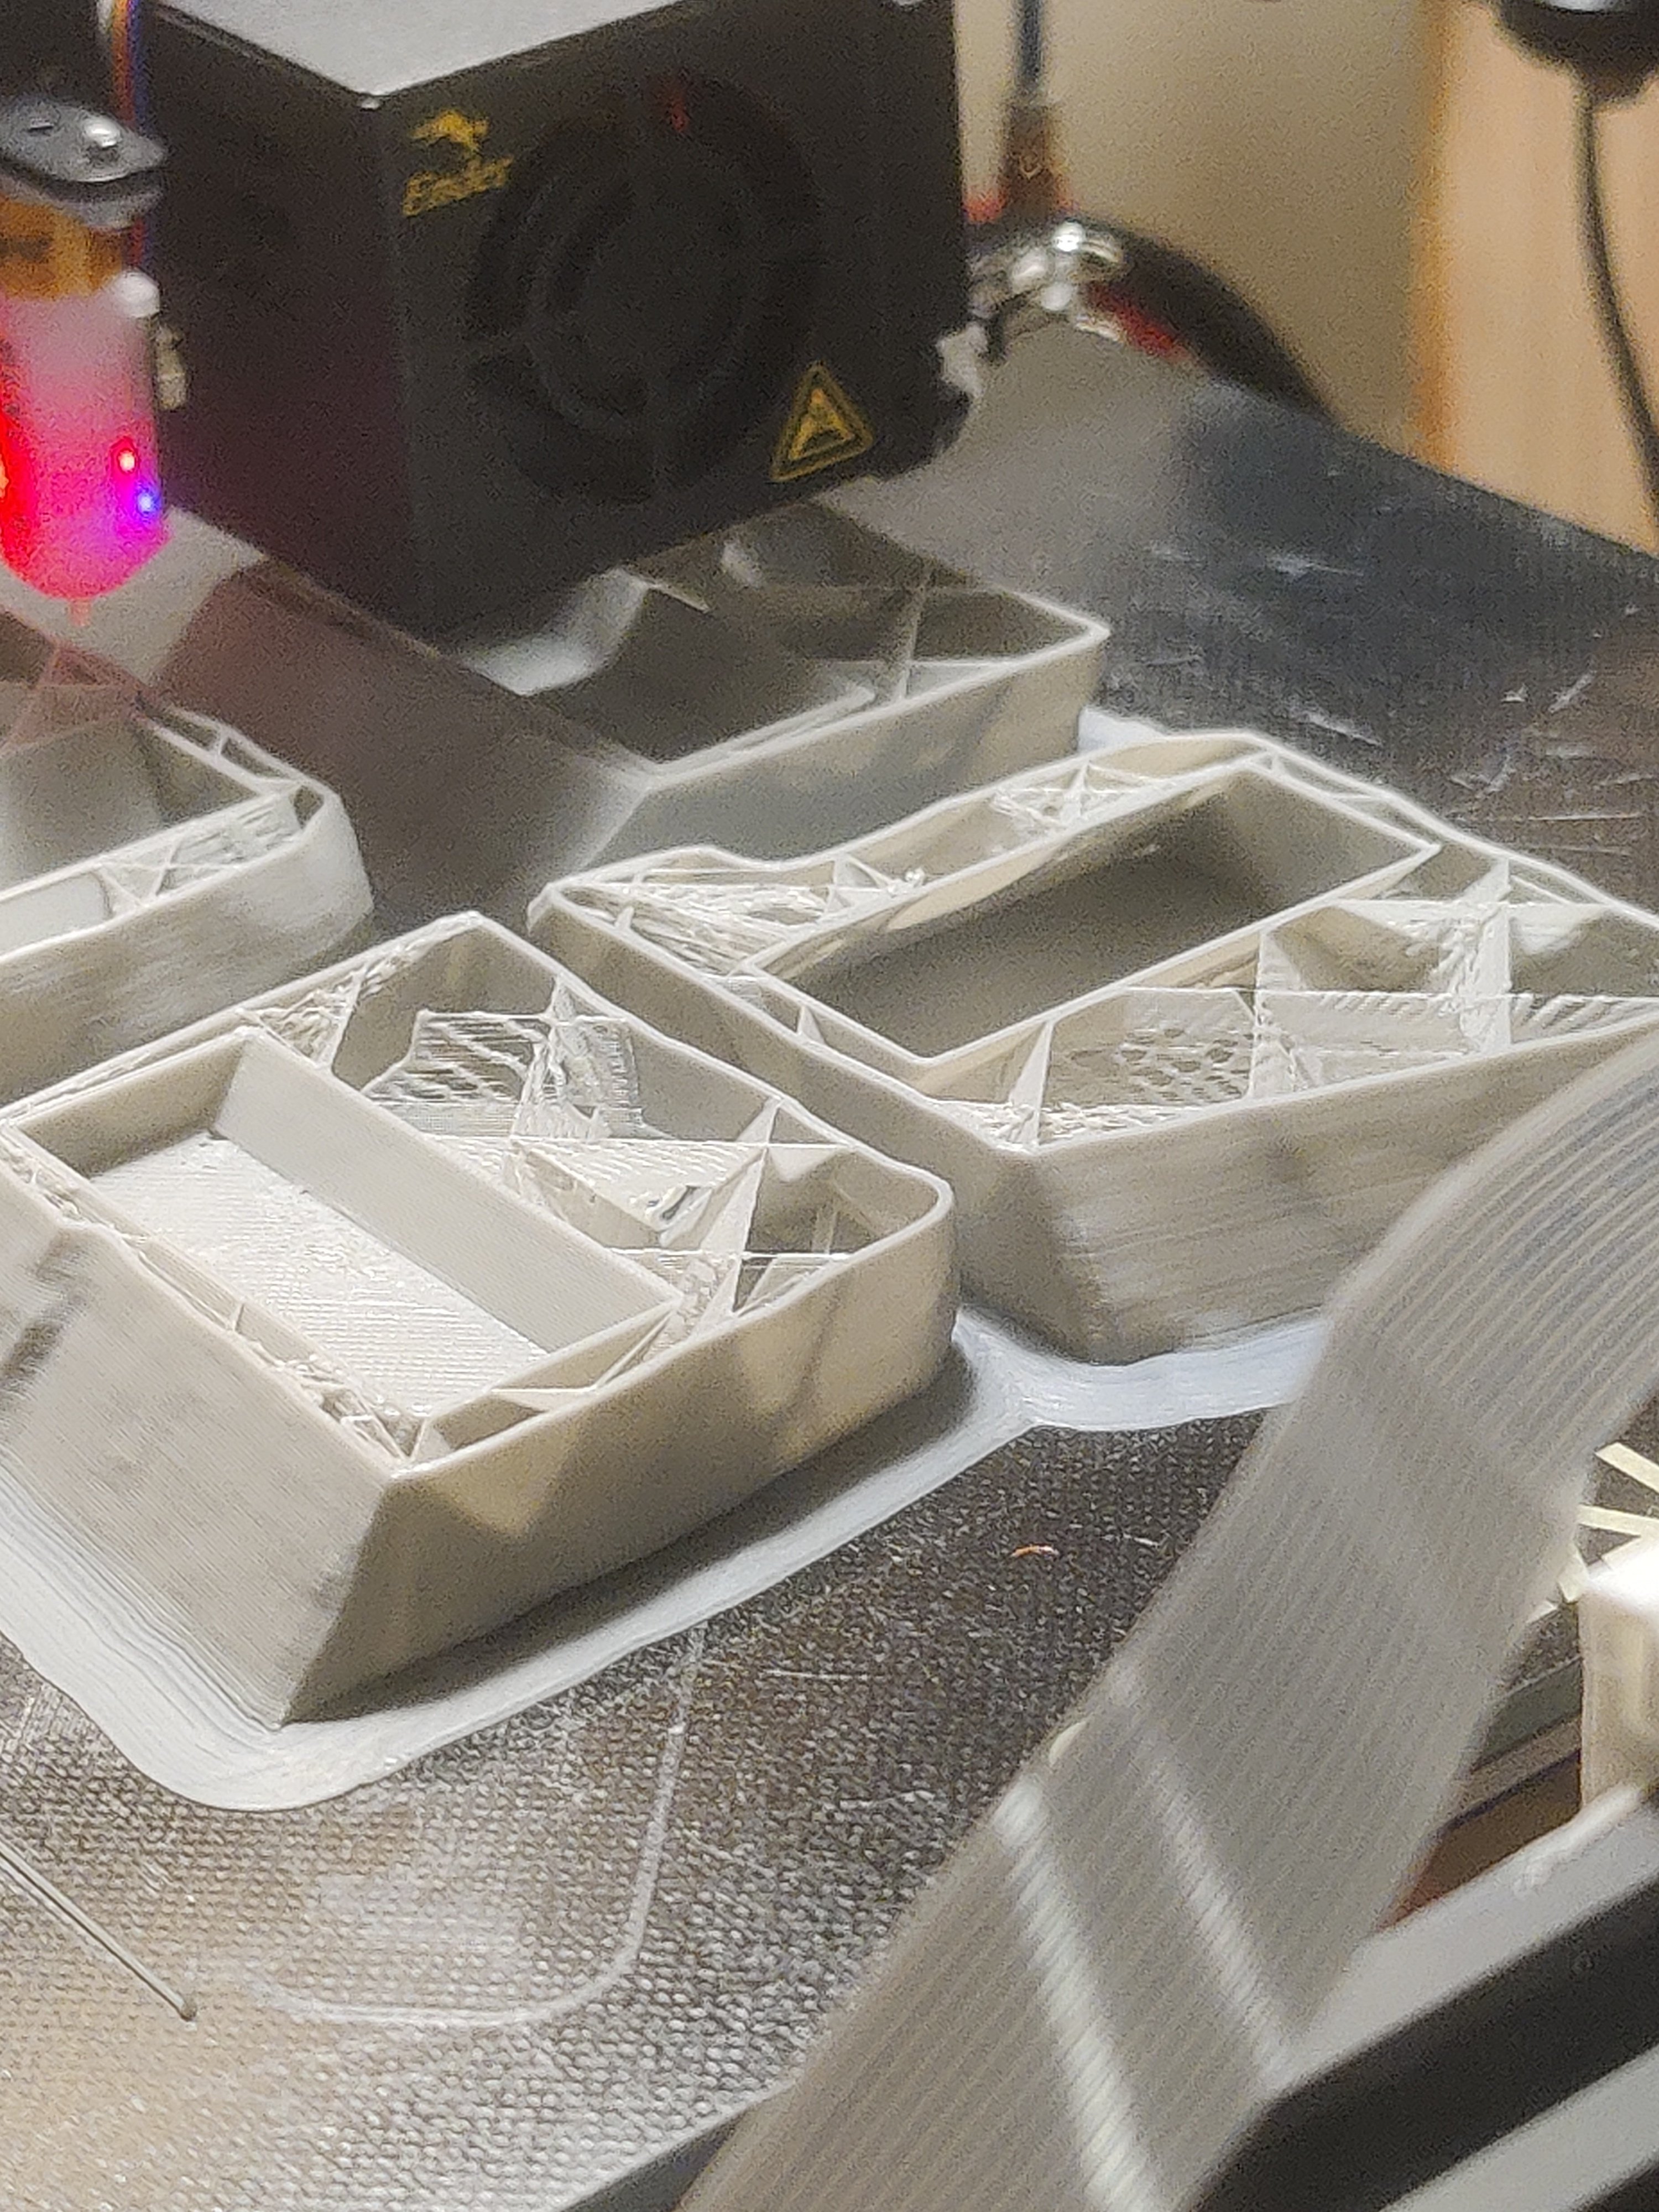 First layer porn : r/3Dprinting